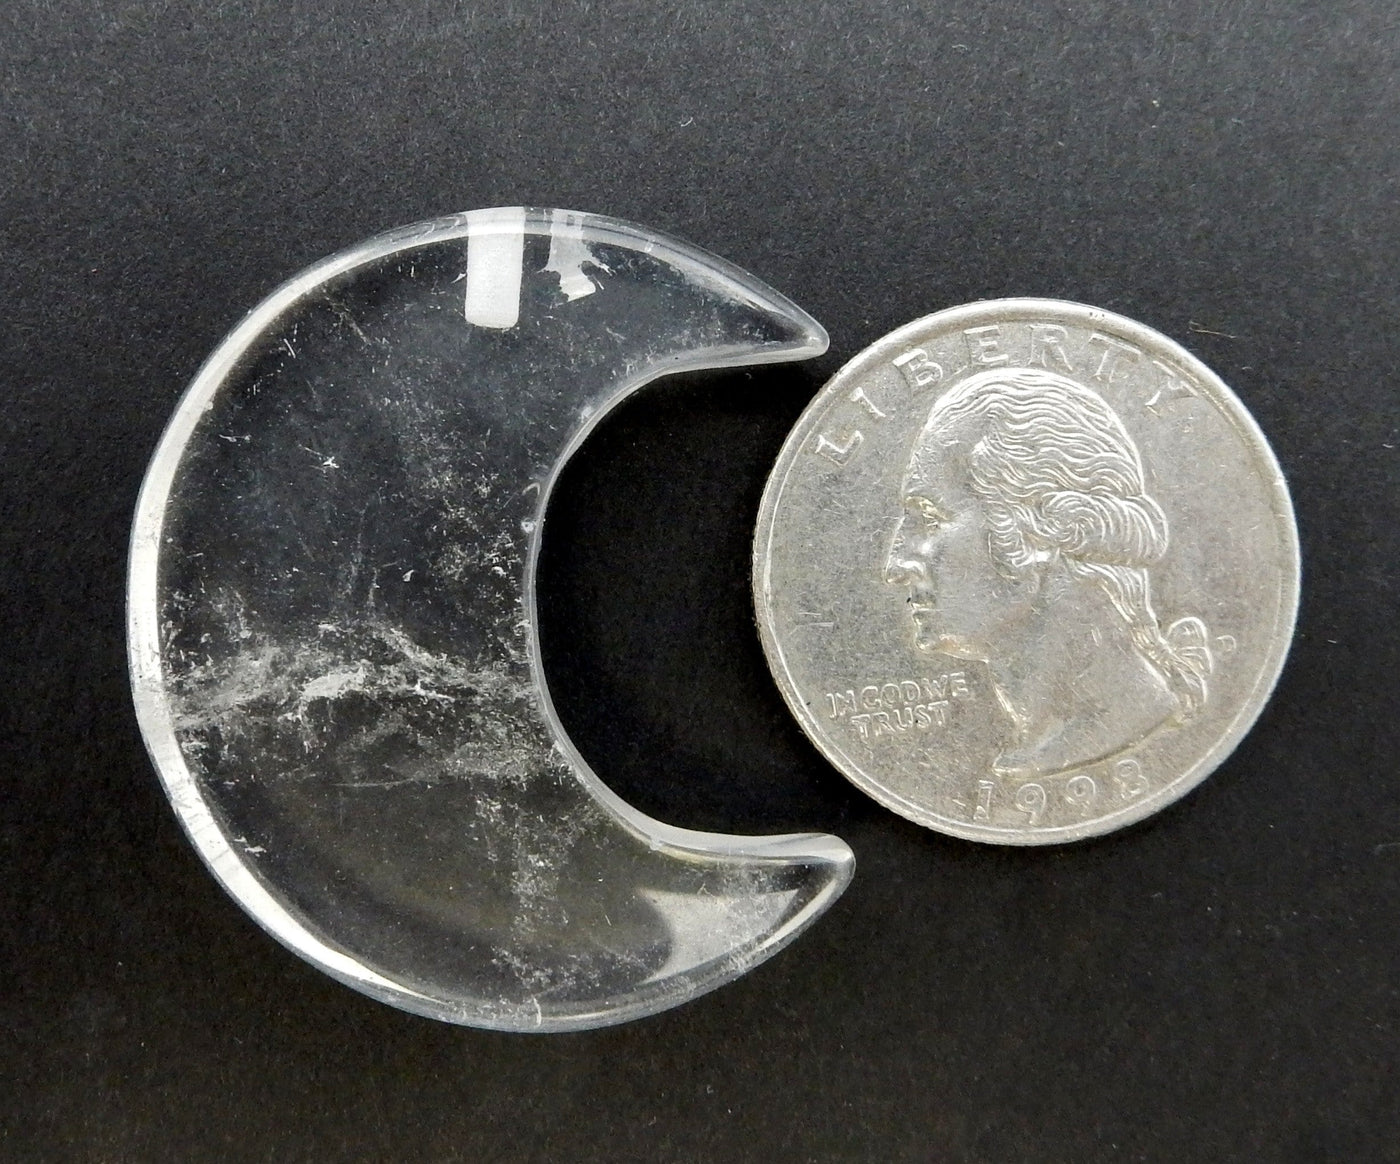 Crystal Quartz Half Crescent Moon - Drilled displayed next to a quarter for size reference.